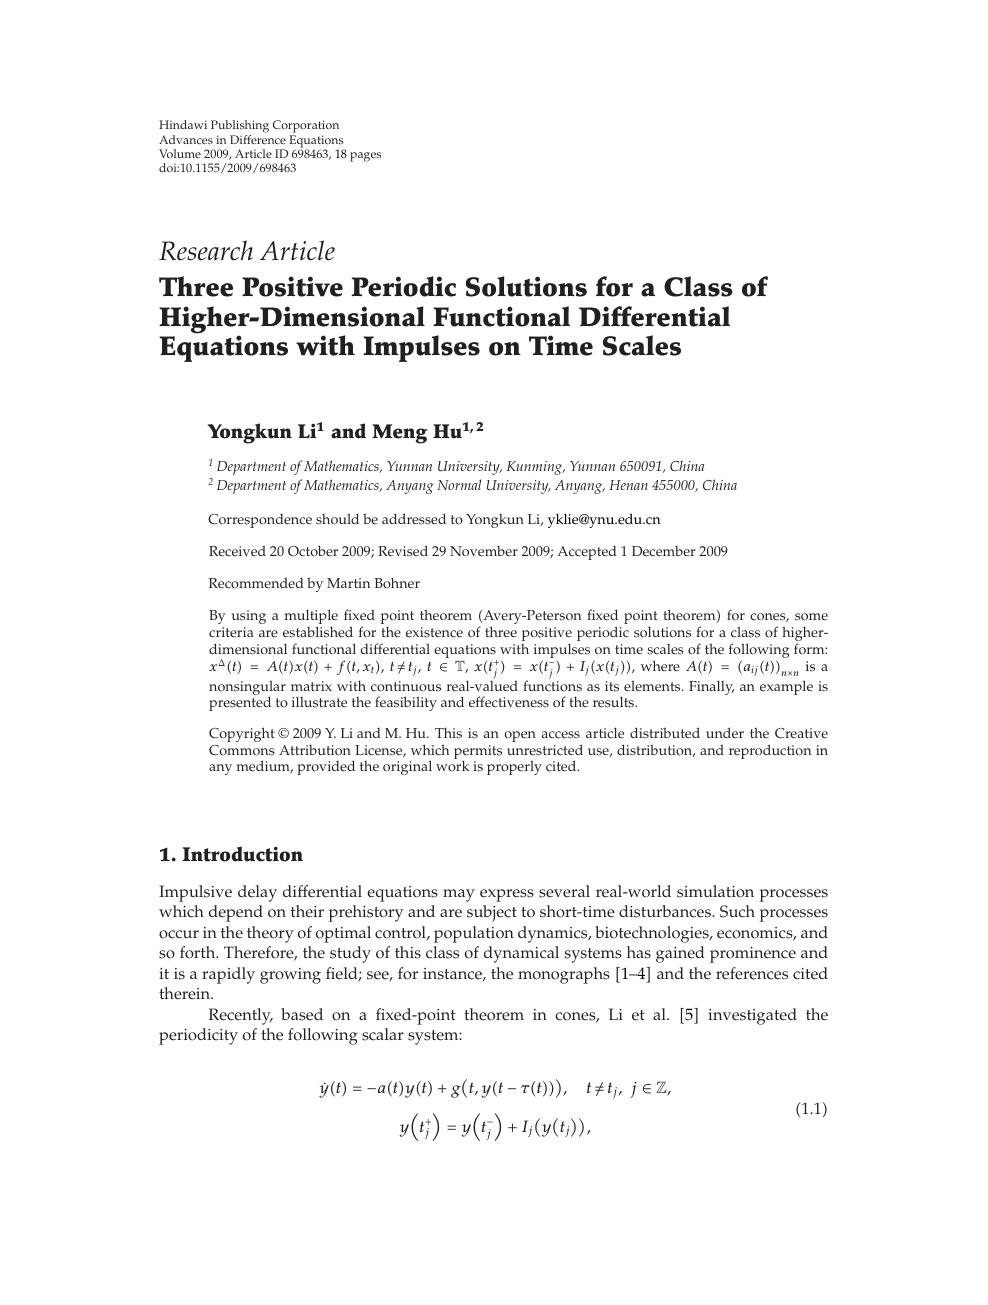 Three Positive Periodic Solutions For A Class Of Higher Dimensional Functional Differential Equations With Impulses On Time Scales Topic Of Research Paper In Mathematics Download Scholarly Article Pdf And Read For Free